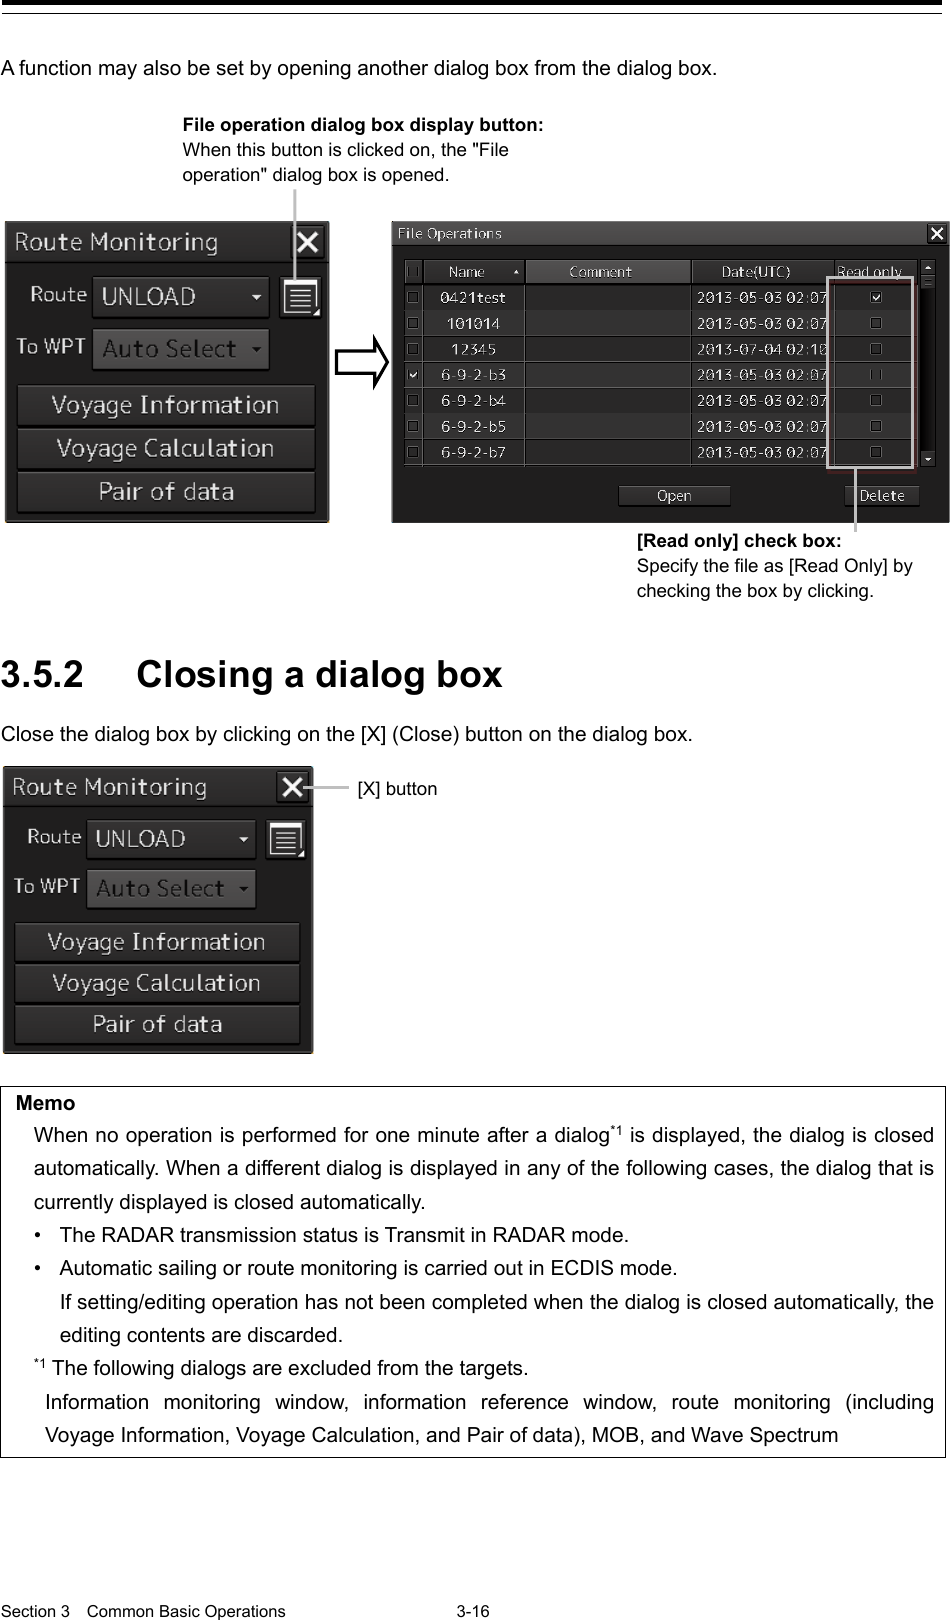  Section 3  Common Basic Operations  3-16  A function may also be set by opening another dialog box from the dialog box.   3.5.2 Closing a dialog box Close the dialog box by clicking on the [X] (Close) button on the dialog box.    Memo When no operation is performed for one minute after a dialog*1 is displayed, the dialog is closed automatically. When a different dialog is displayed in any of the following cases, the dialog that is currently displayed is closed automatically. • The RADAR transmission status is Transmit in RADAR mode. • Automatic sailing or route monitoring is carried out in ECDIS mode. If setting/editing operation has not been completed when the dialog is closed automatically, the editing contents are discarded. *1 The following dialogs are excluded from the targets. Information monitoring window, information reference window, route monitoring (including Voyage Information, Voyage Calculation, and Pair of data), MOB, and Wave Spectrum        [Read only] check box:   Specify the file as [Read Only] by checking the box by clicking. File operation dialog box display button:   When this button is clicked on, the &quot;File operation&quot; dialog box is opened. [X] button 